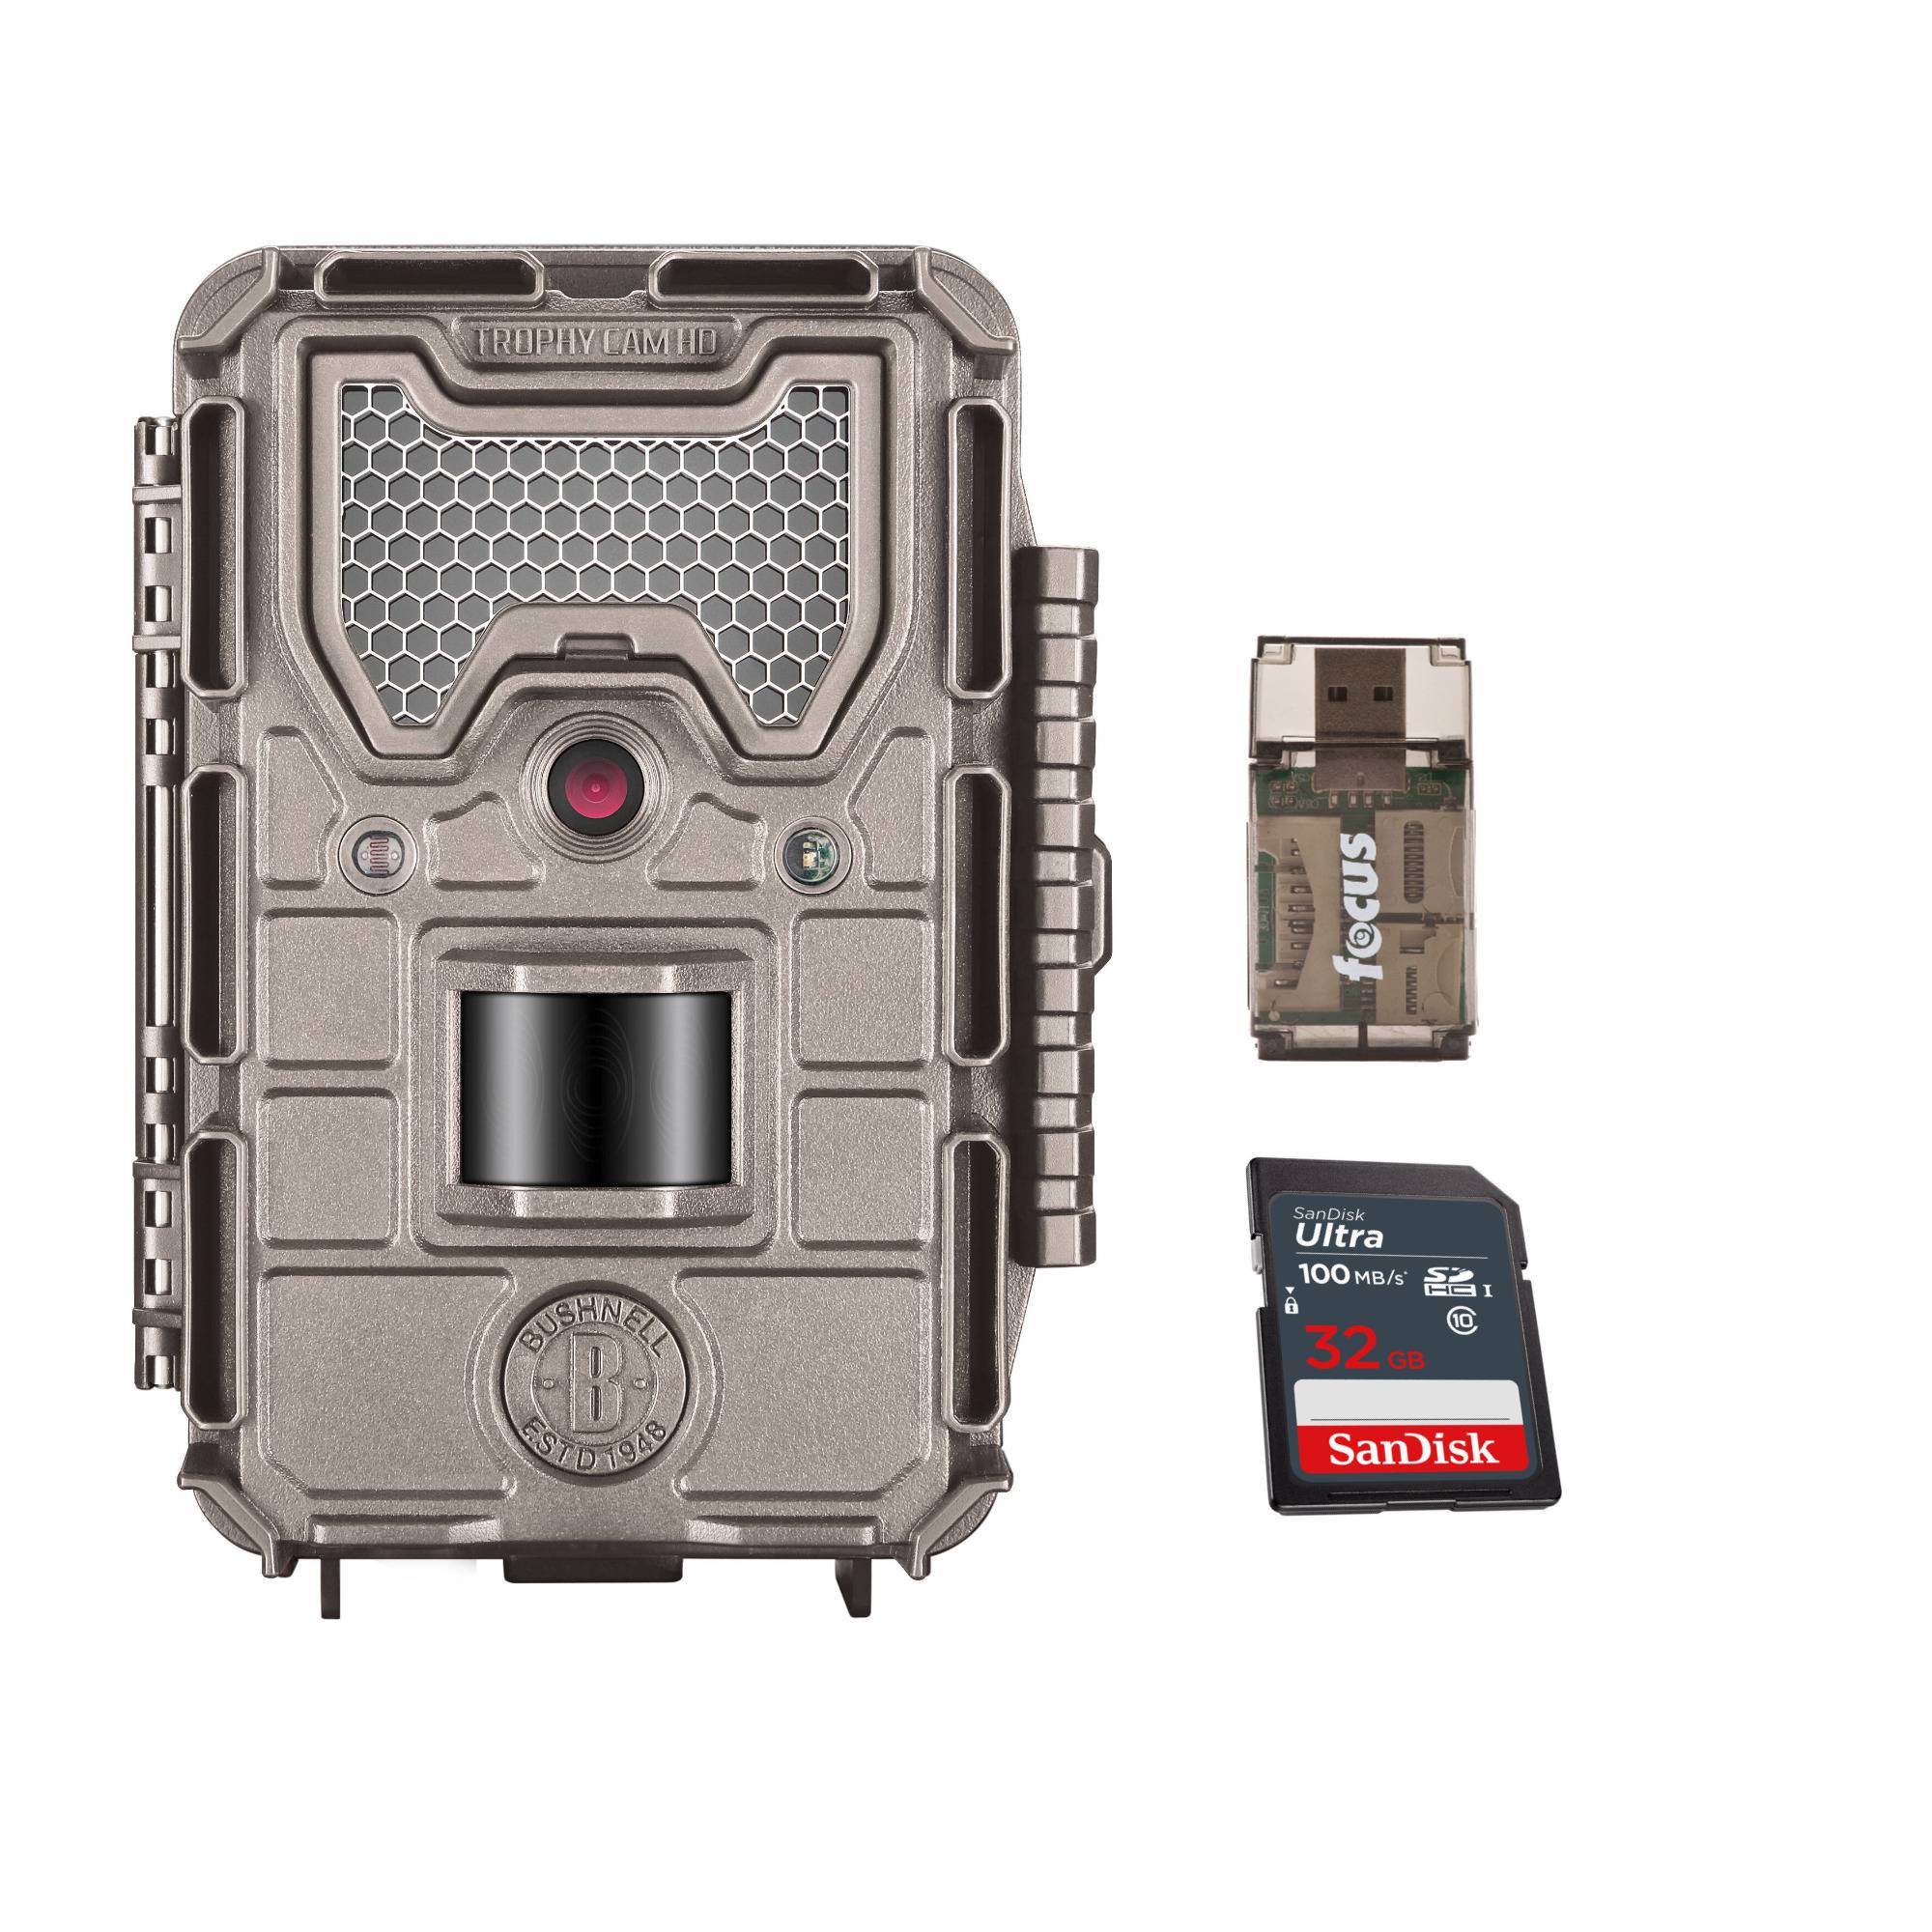 Bushnell 16MP HD Essential E3 Trophy Cam Low Glow Trail Camera, w/ SD Card and Card Reader